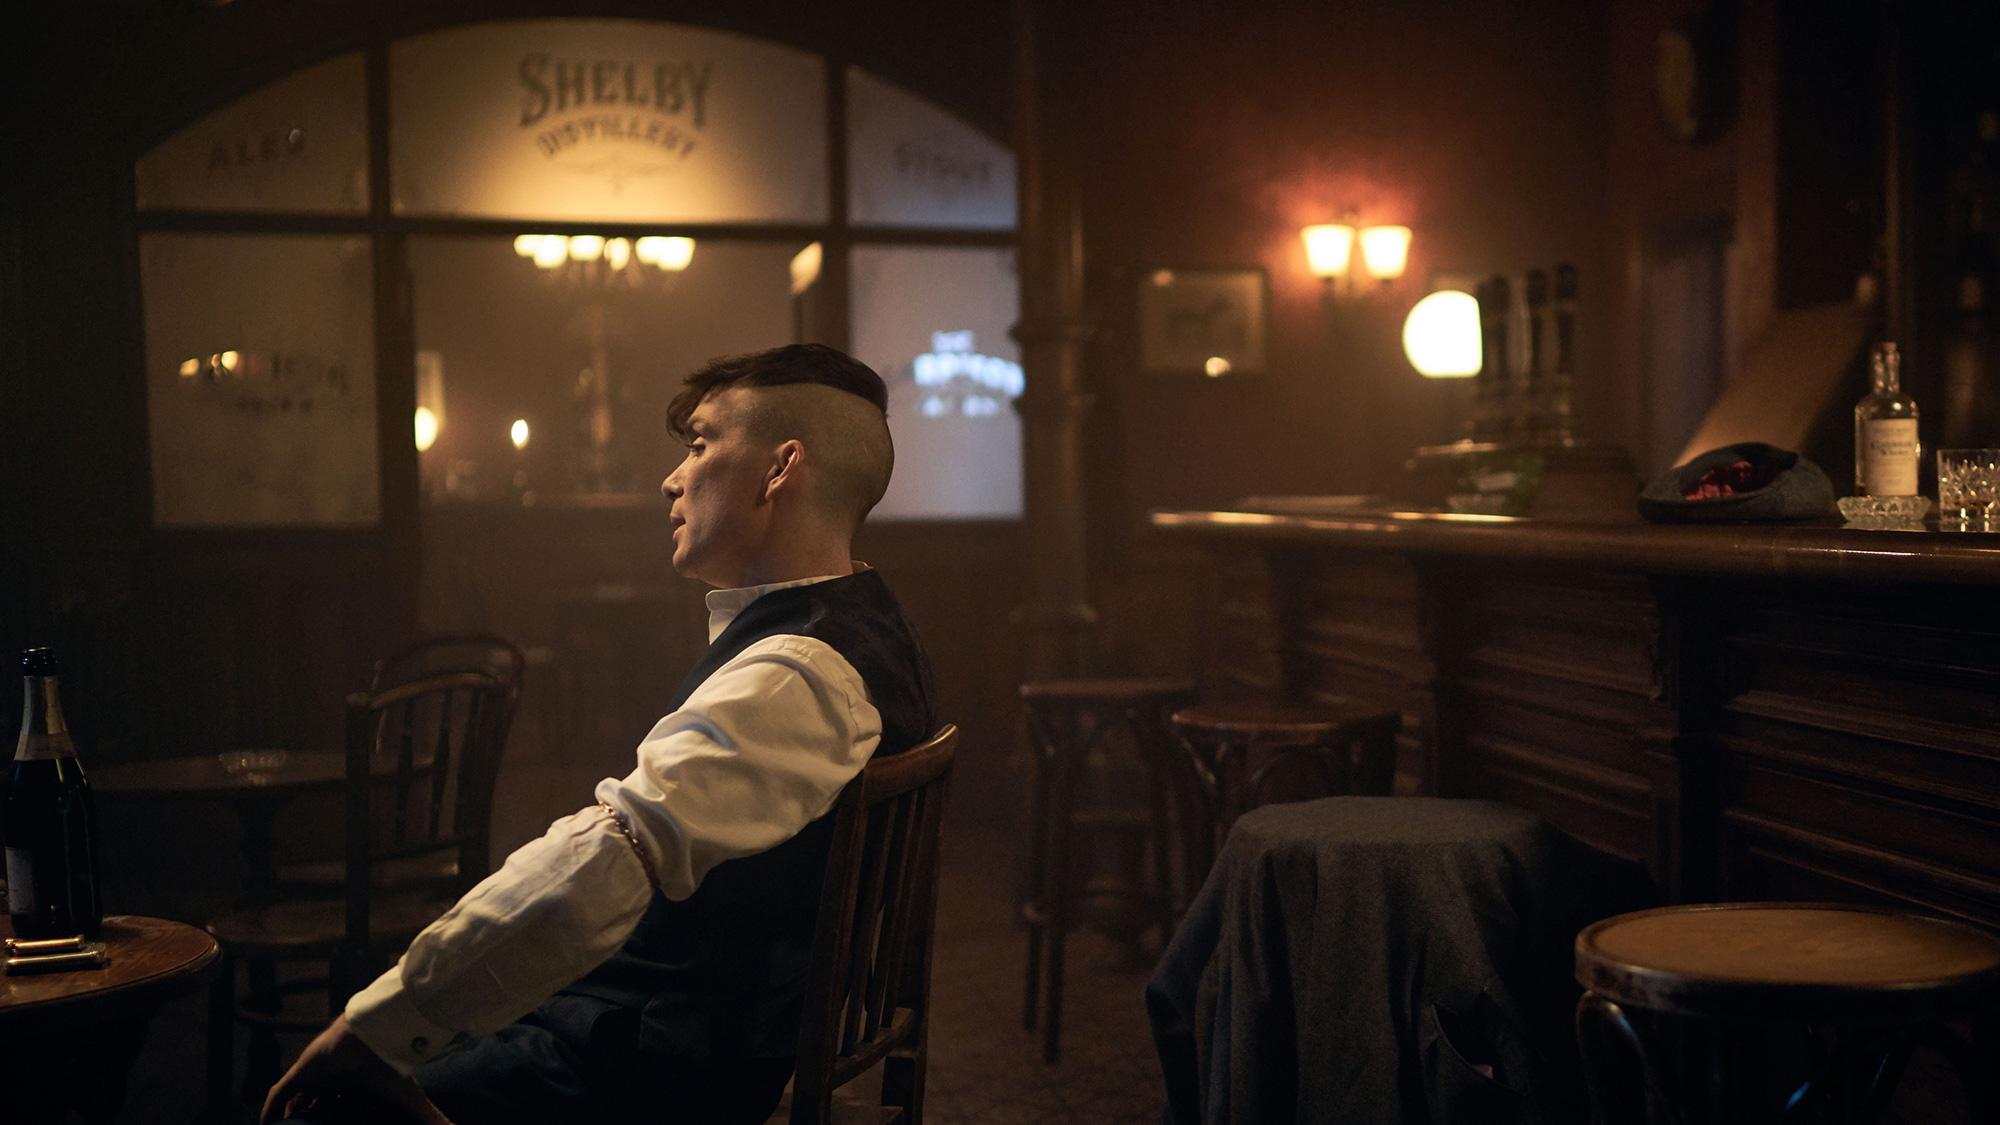 How To Watch Peaky Blinders Season 5 Episode 3 Online Free Streaming In The Uk Or Abroad Kurio